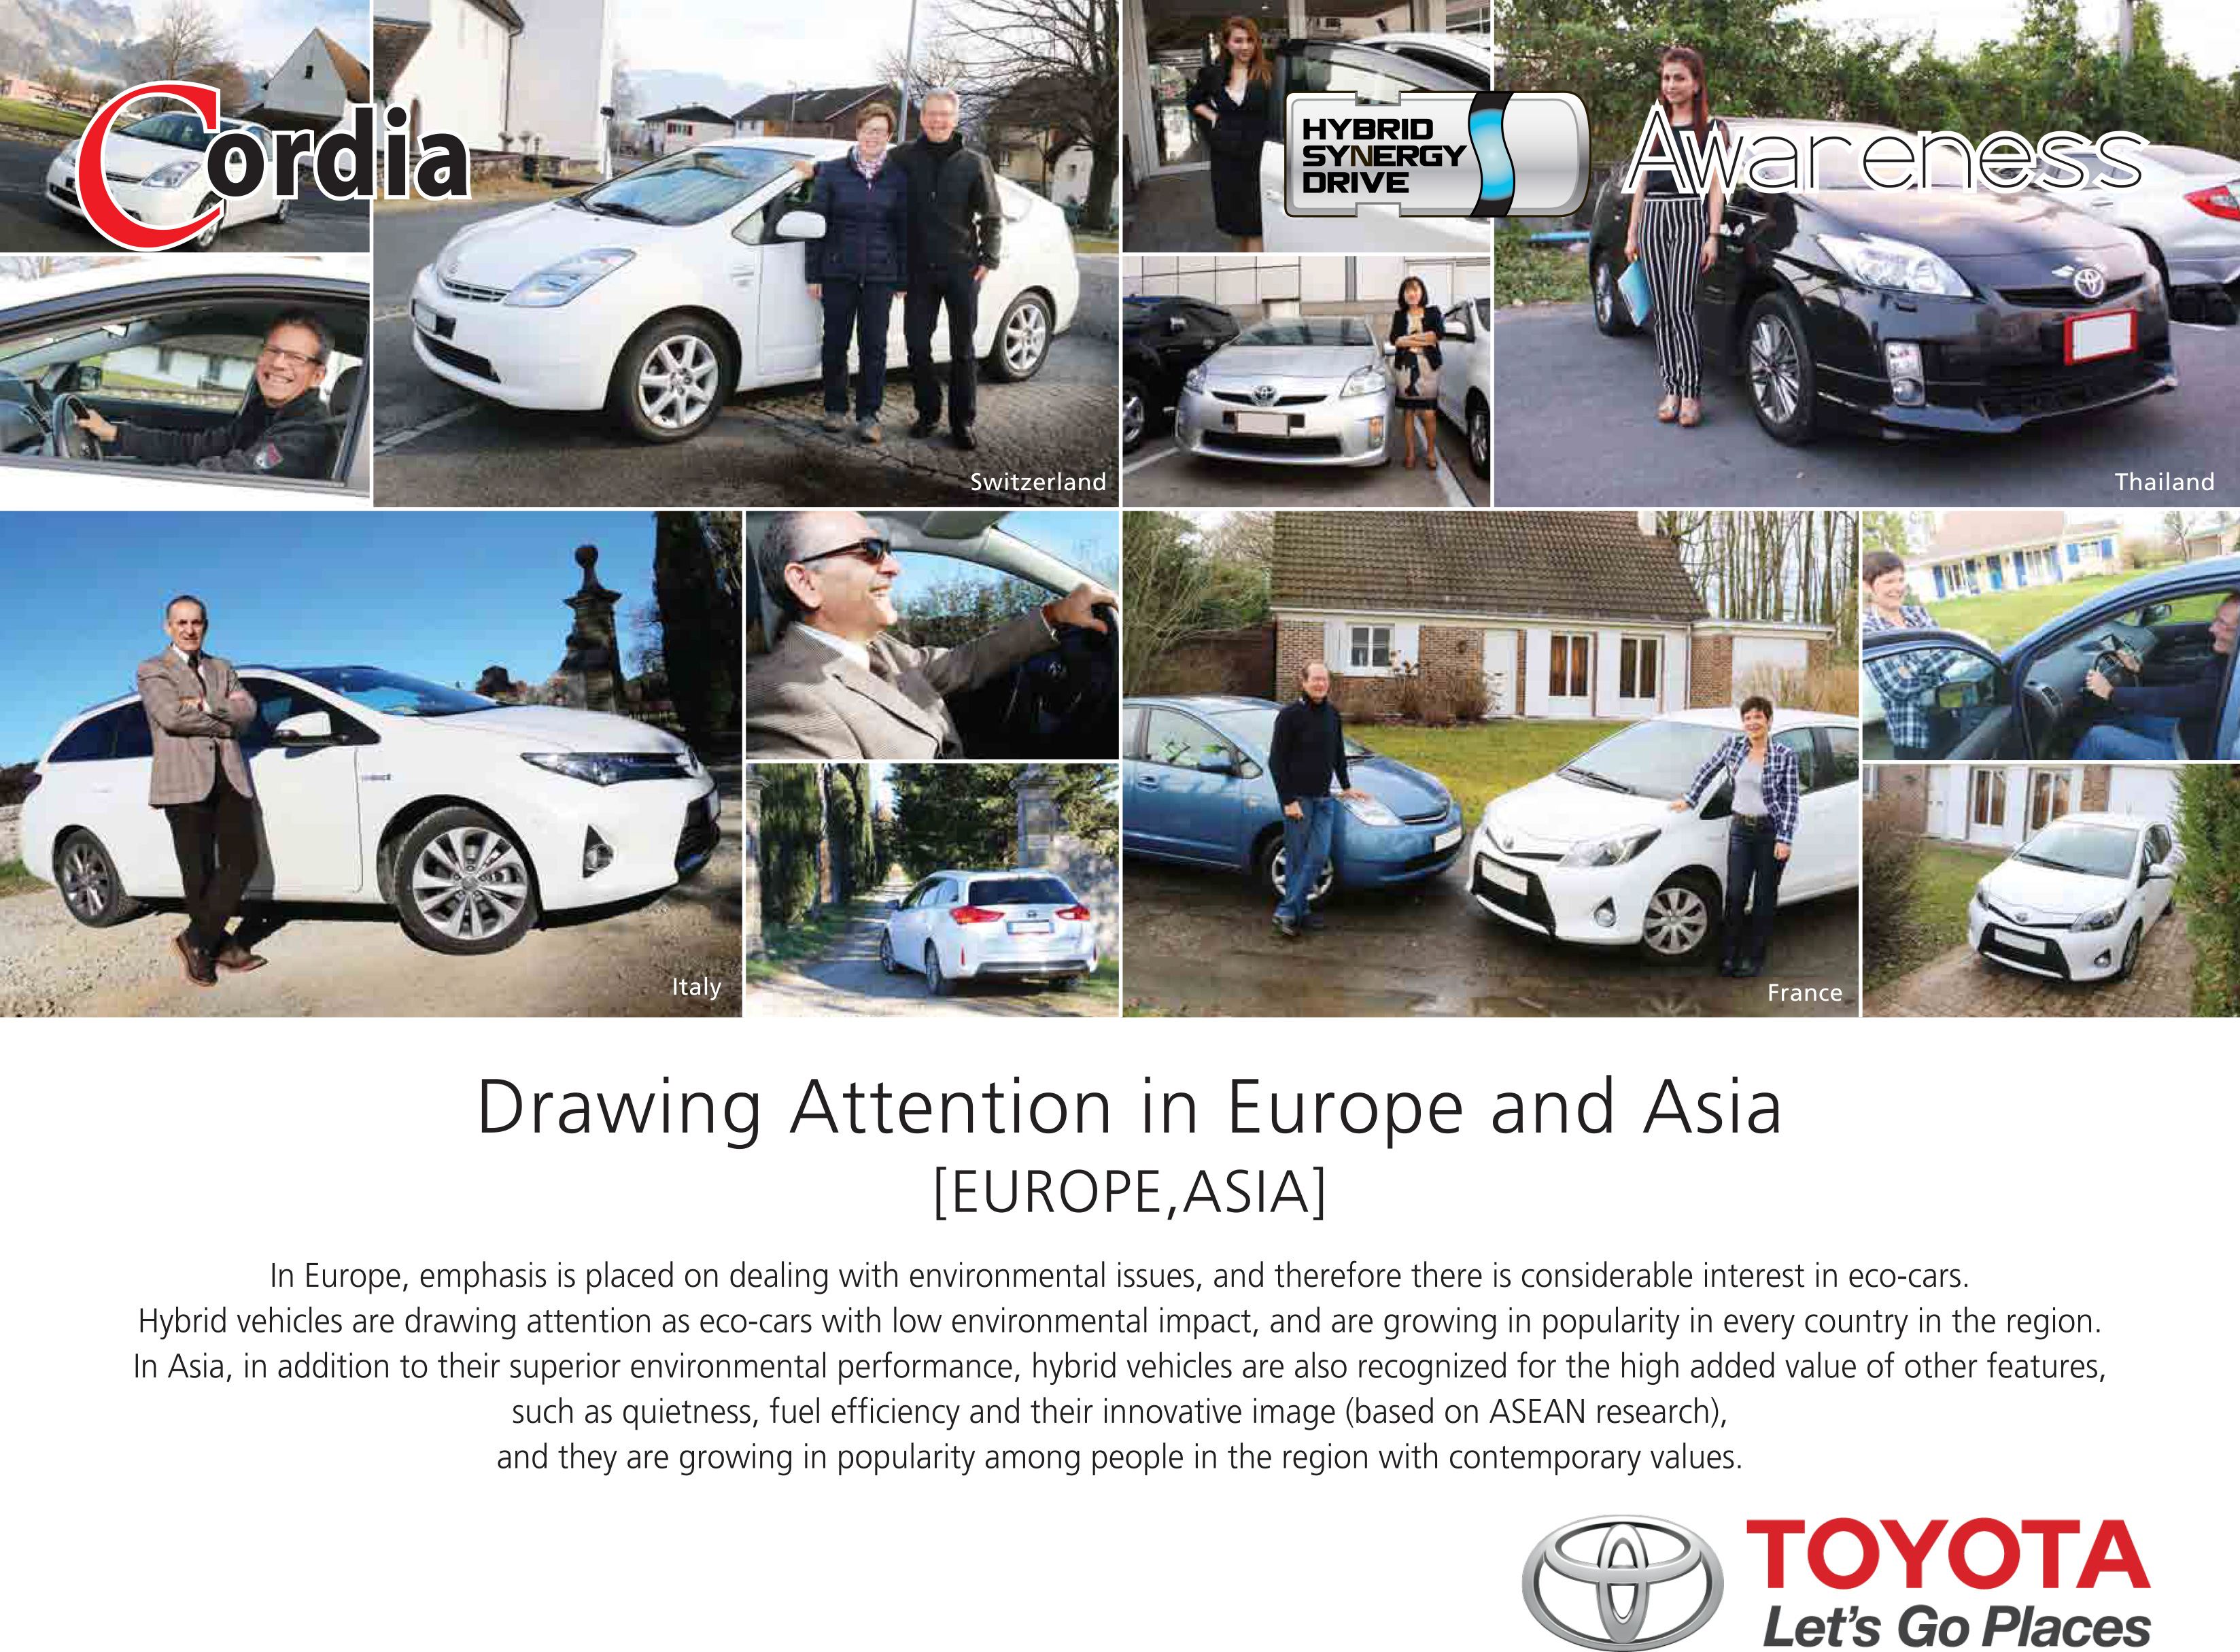 Drawing Attention in Europe and Asia (Europe, Asia) - Hybrid Awareness